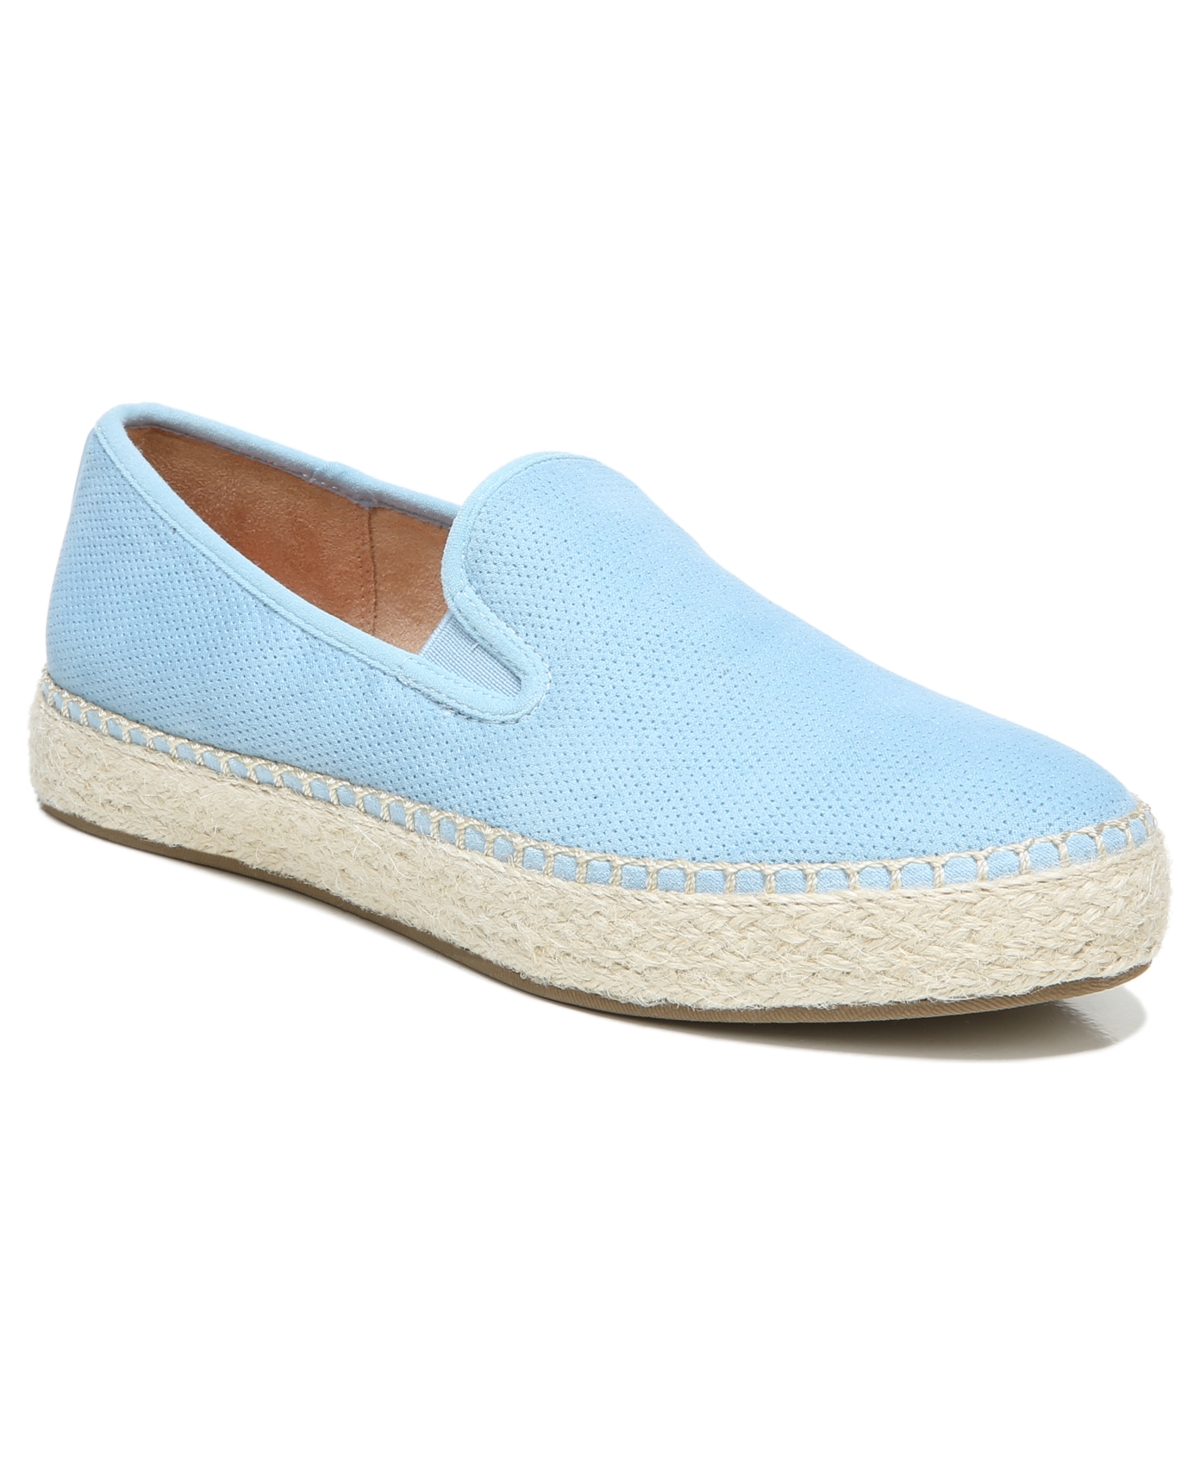 Dr. Scholl's Women's Far Out Espadrille Loafers Women's Shoes